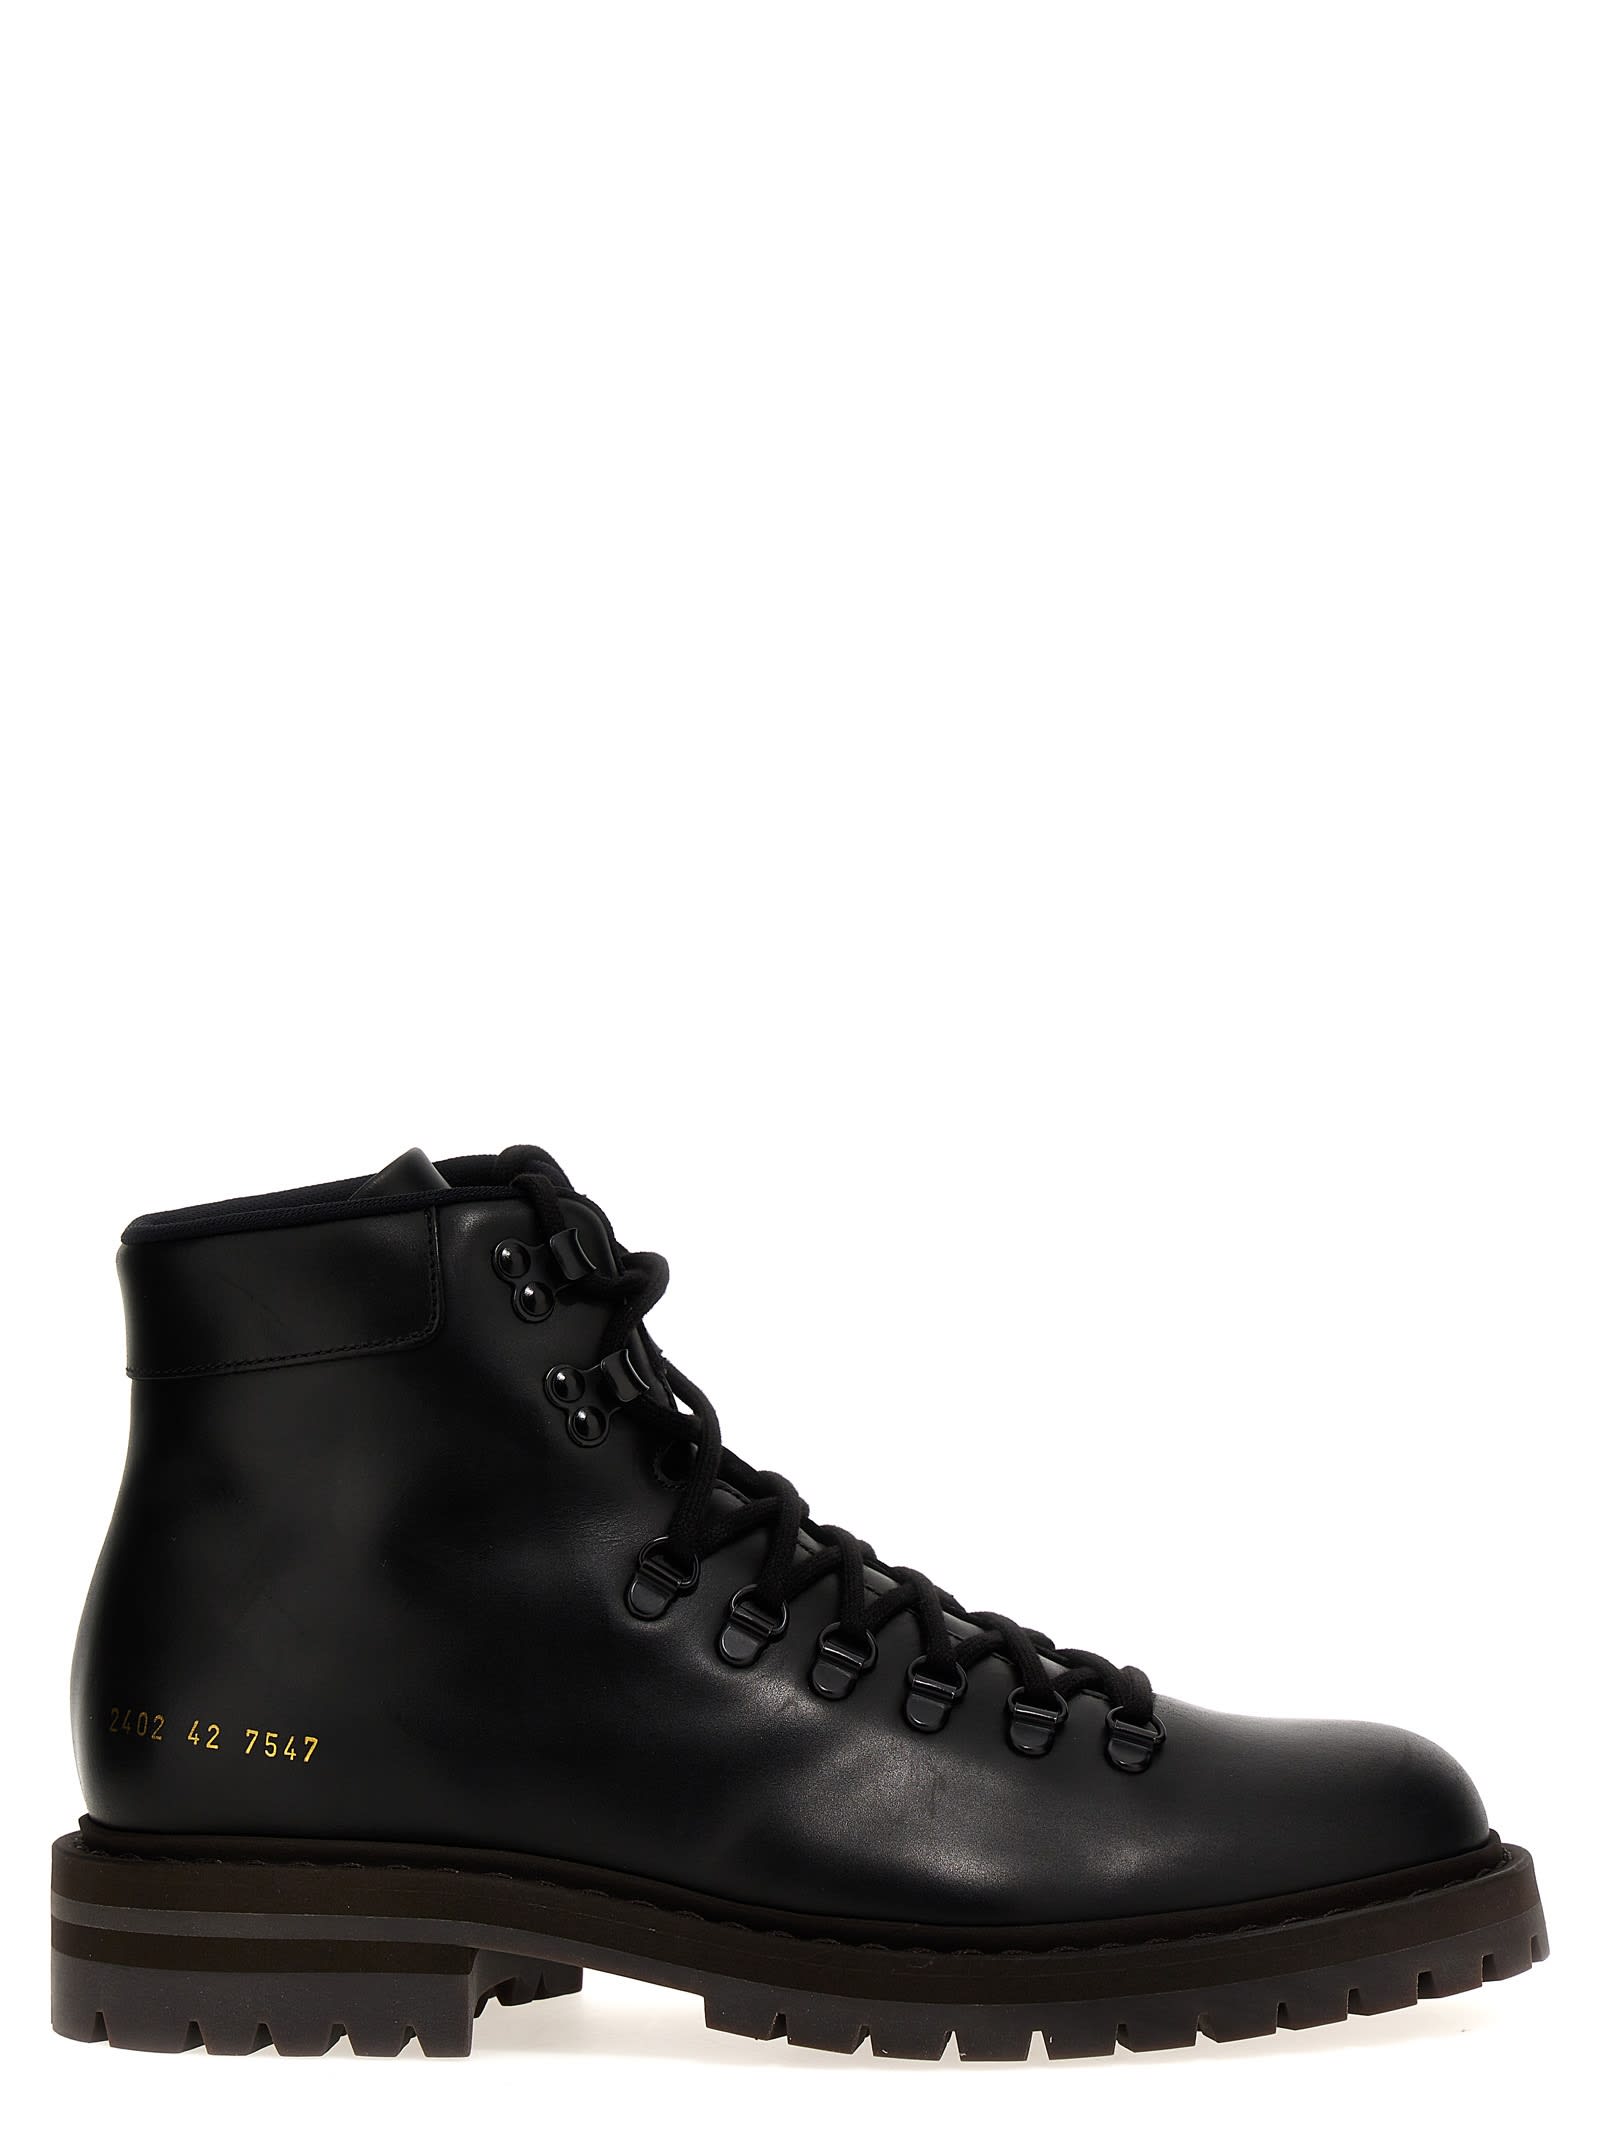 Common Projects Hiking Combat Boots